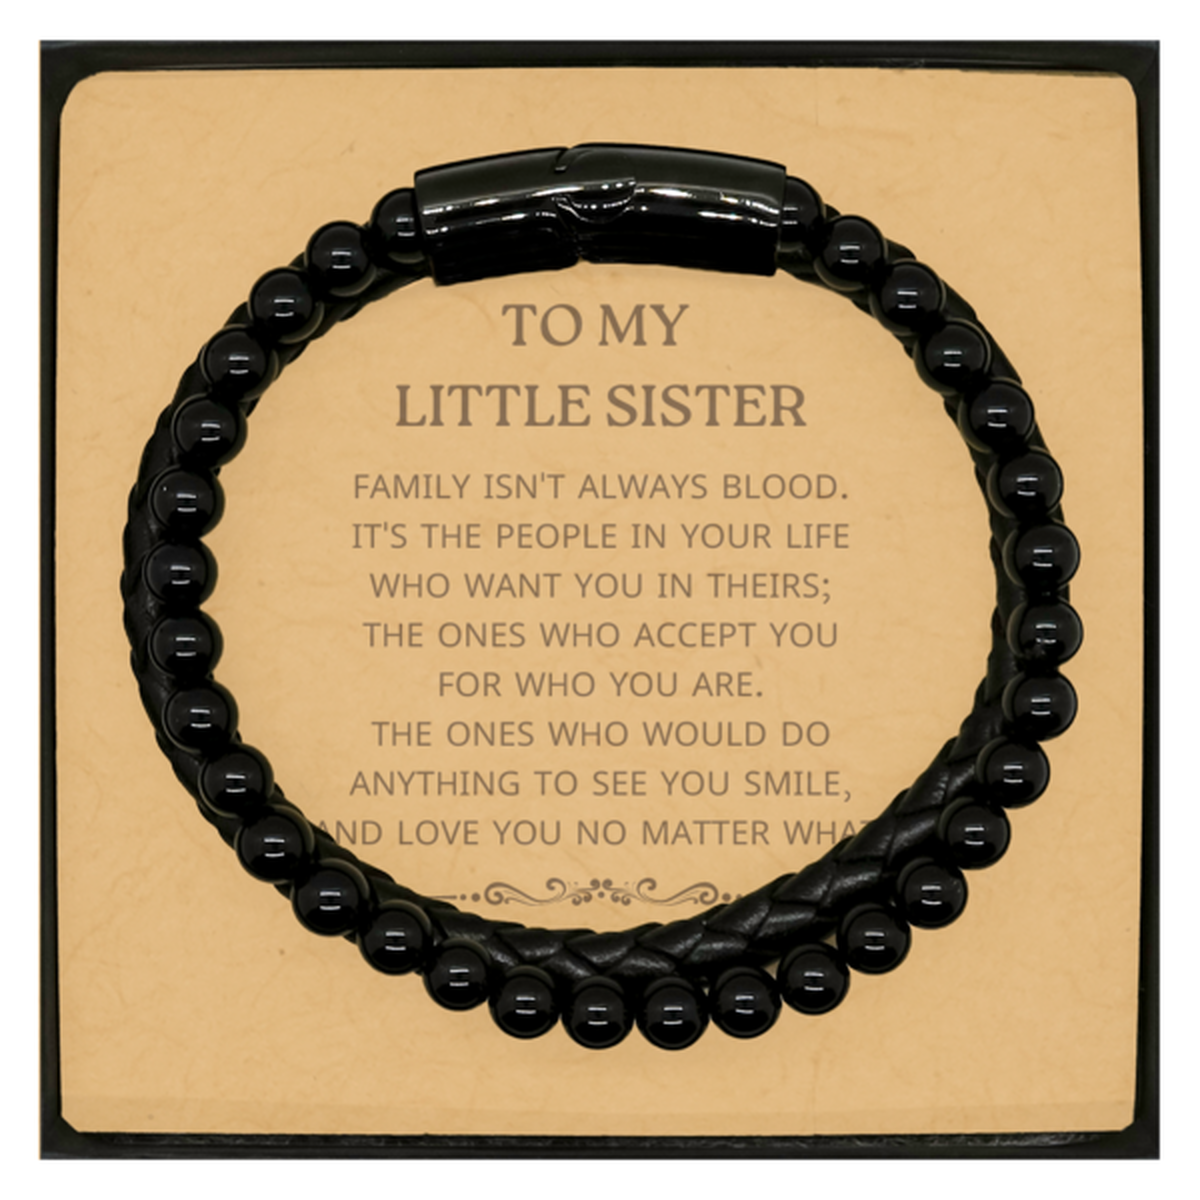 To My Little Sister Gifts, Family isn't always blood, Little Sister Stone Leather Bracelets, Birthday Christmas Unique Present For Little Sister